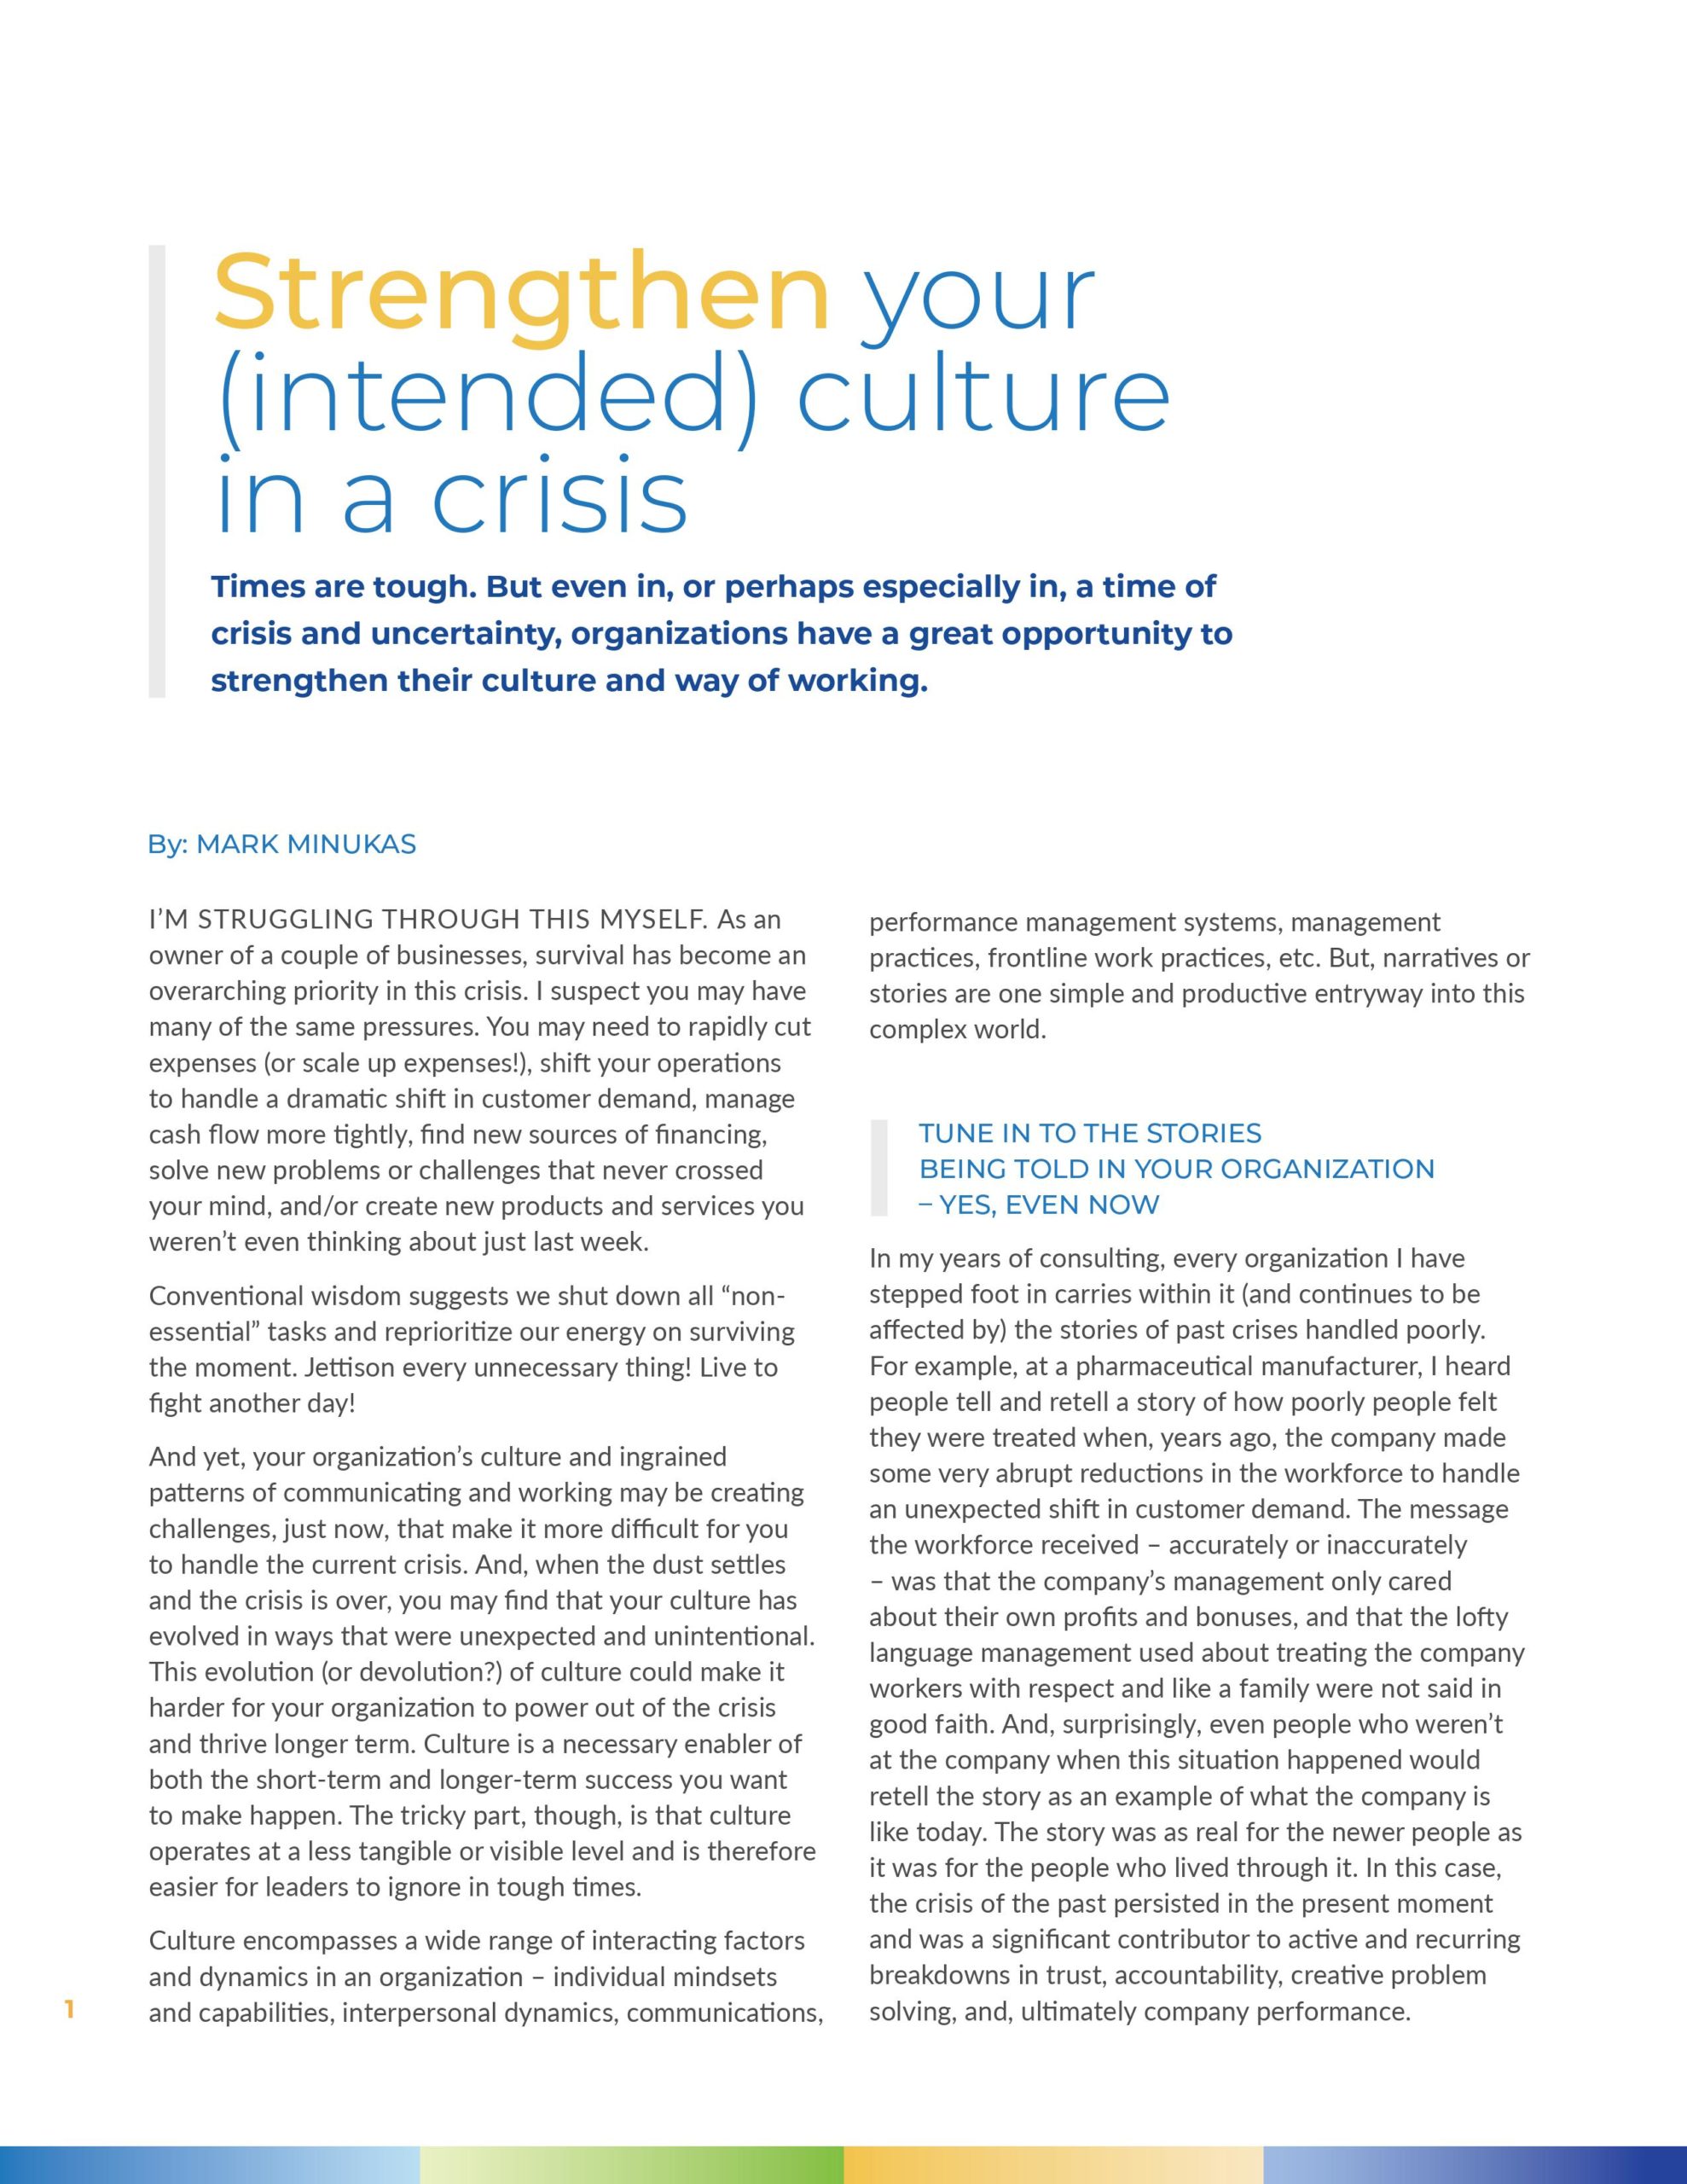 Strengthen your intended culture in a crisis by Mark Minukas